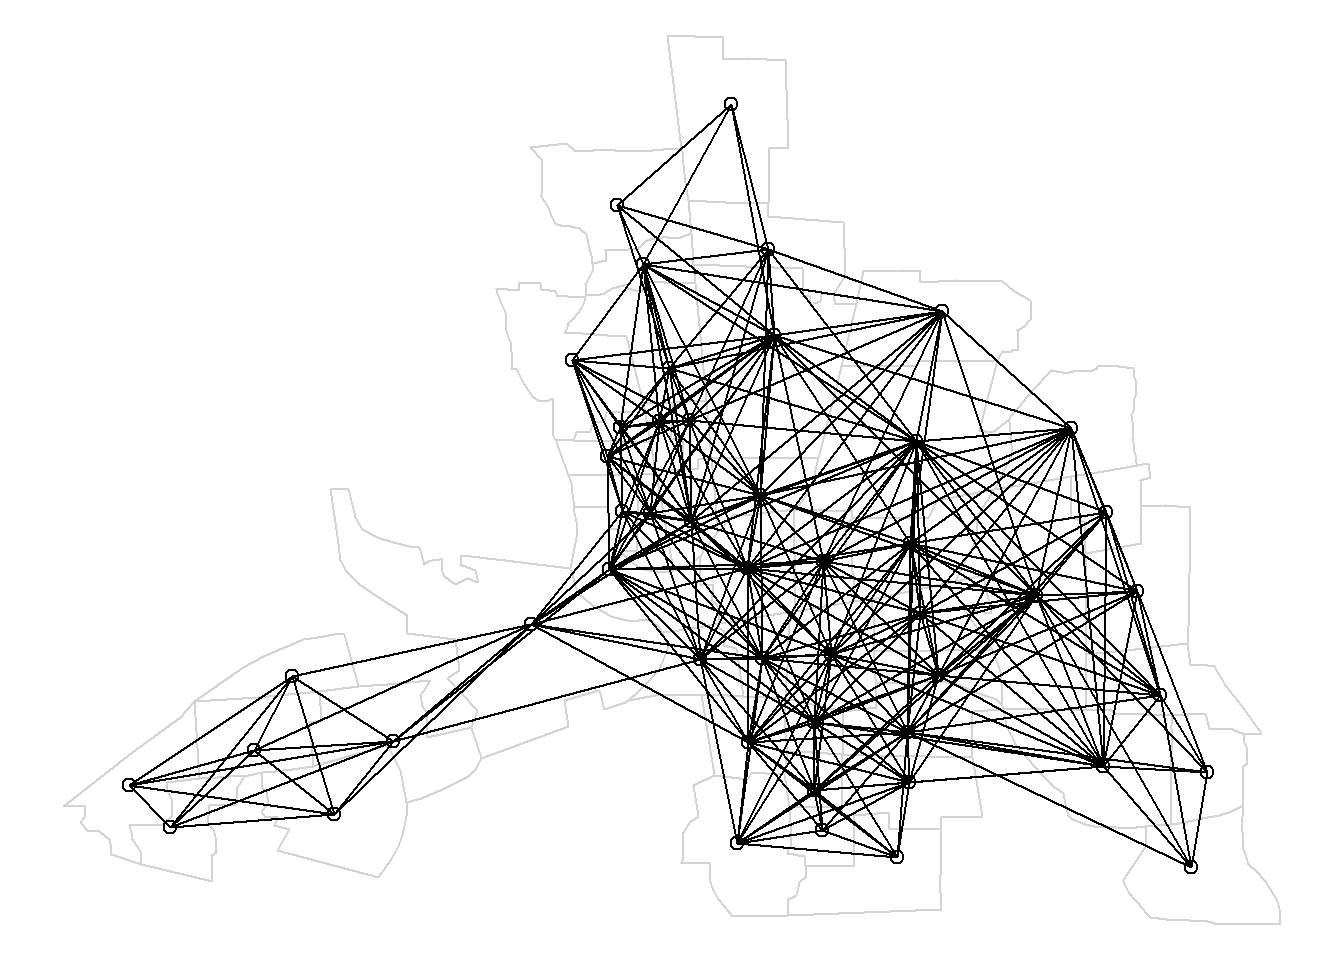 Map of neighbors based on contiguty. Neighbors of first order (left), second order (middle), and first order until second order (right).